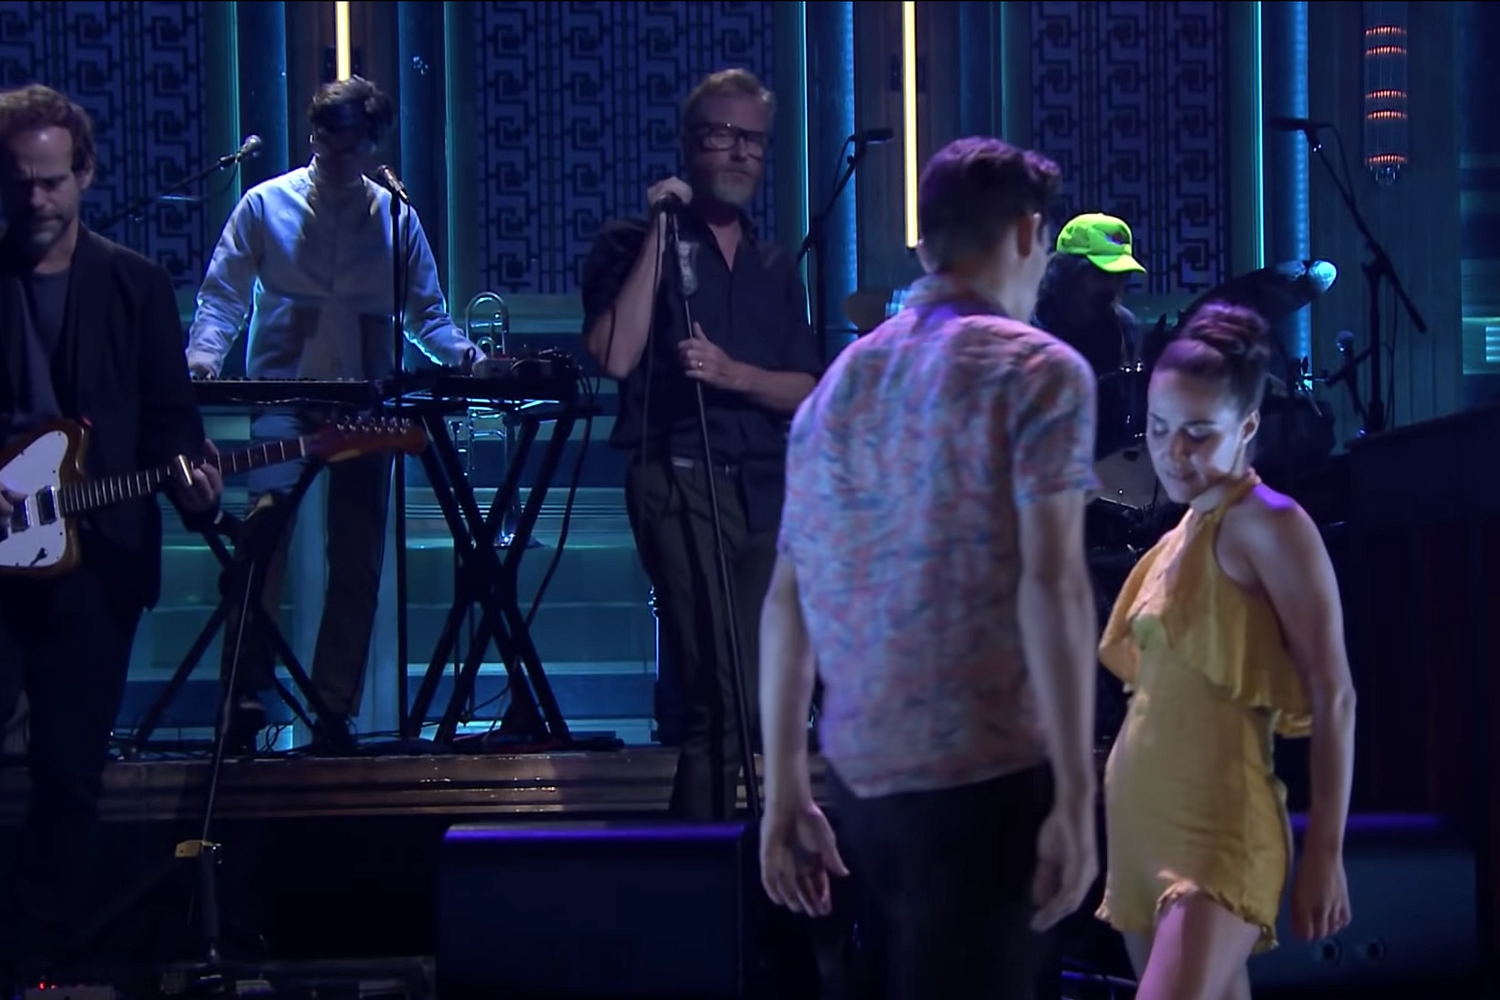 The National recreate their ‘Dark Side Of The Gym’ video on Fallon